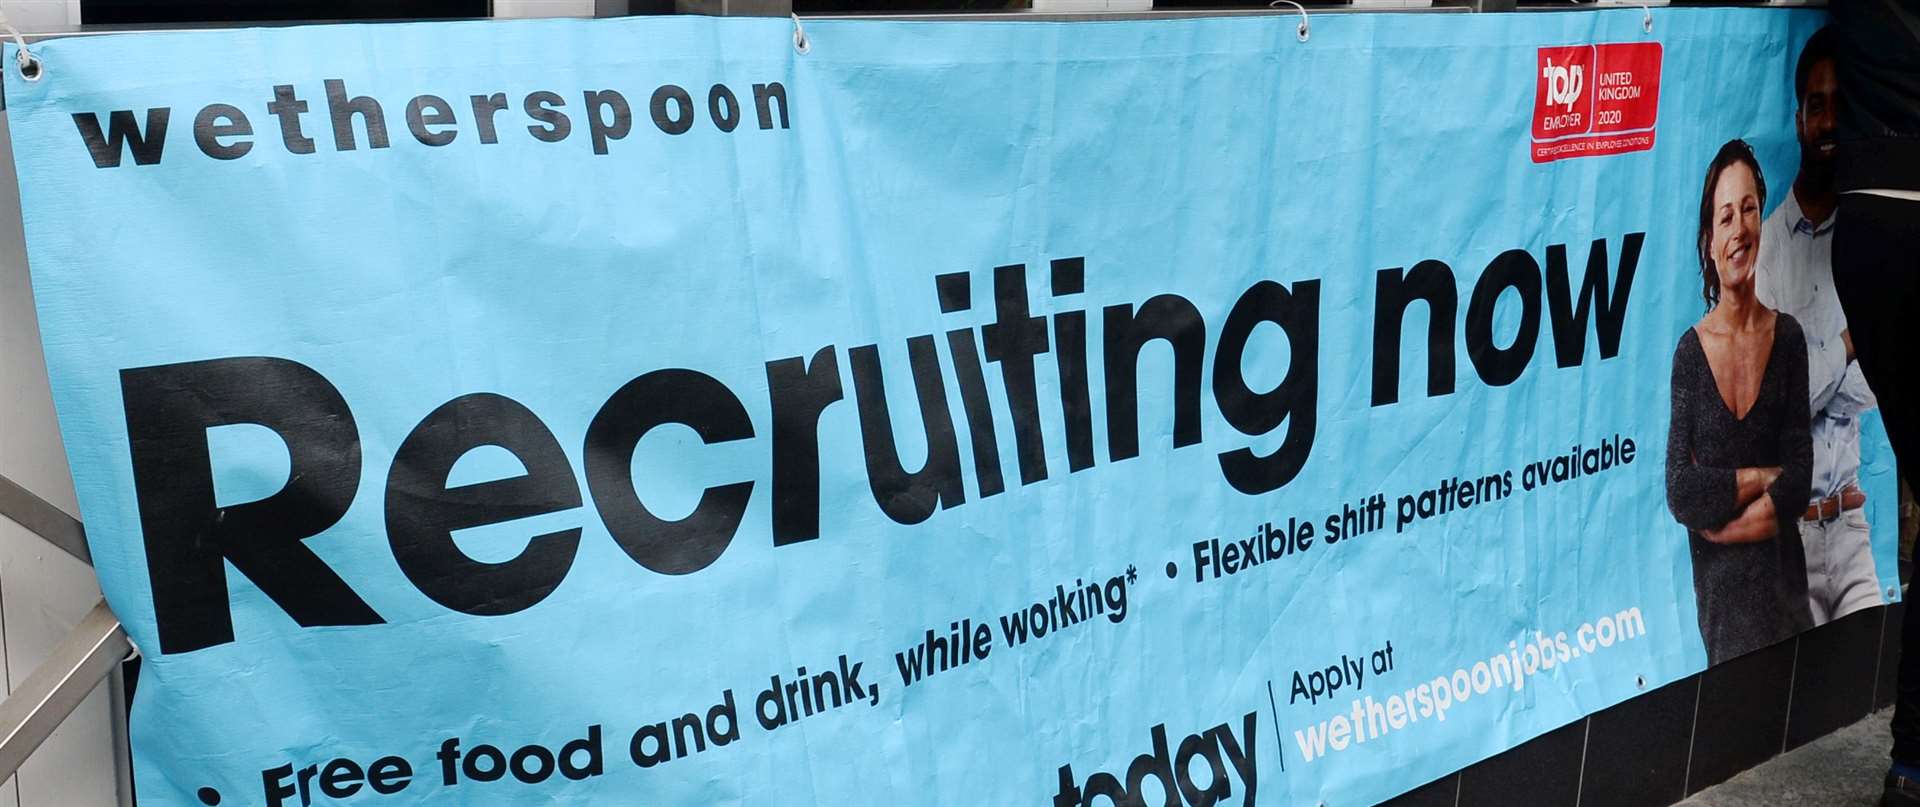 Staff are being sought by The Kings Highway in Church Street, Inverness.